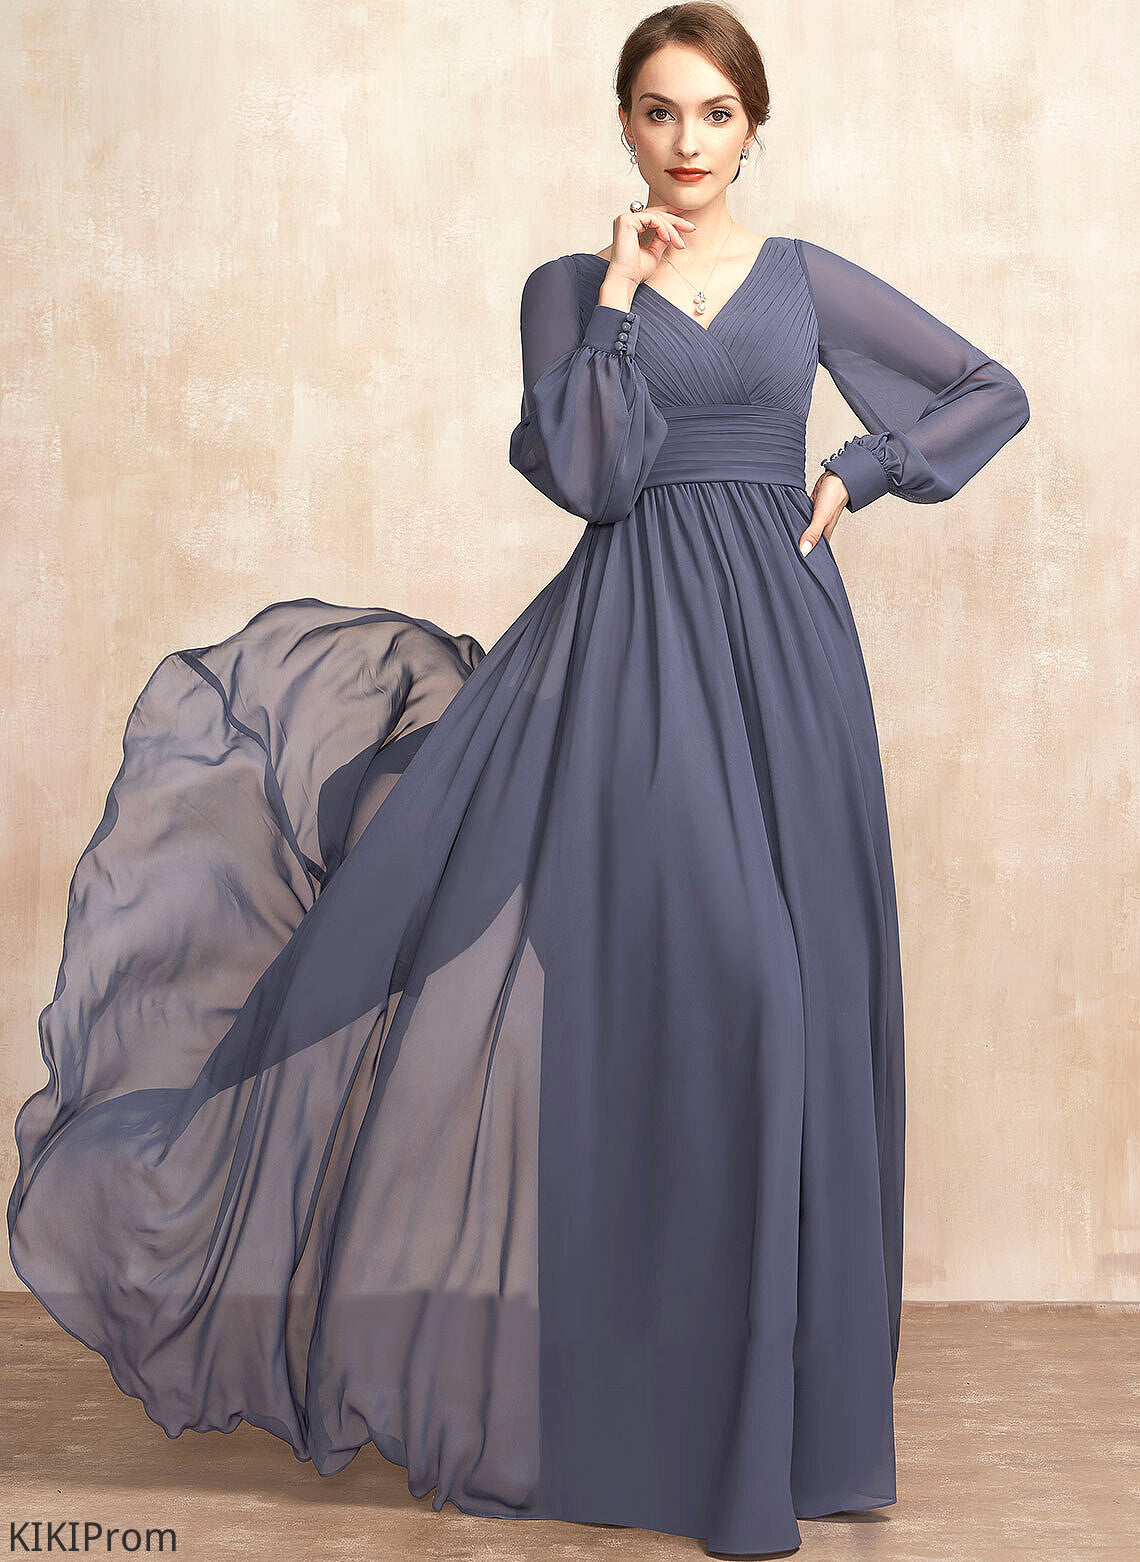 Chiffon of A-Line Dress V-neck Bride the Mother of the Bride Dresses With Ruffle Floor-Length Jeanie Mother